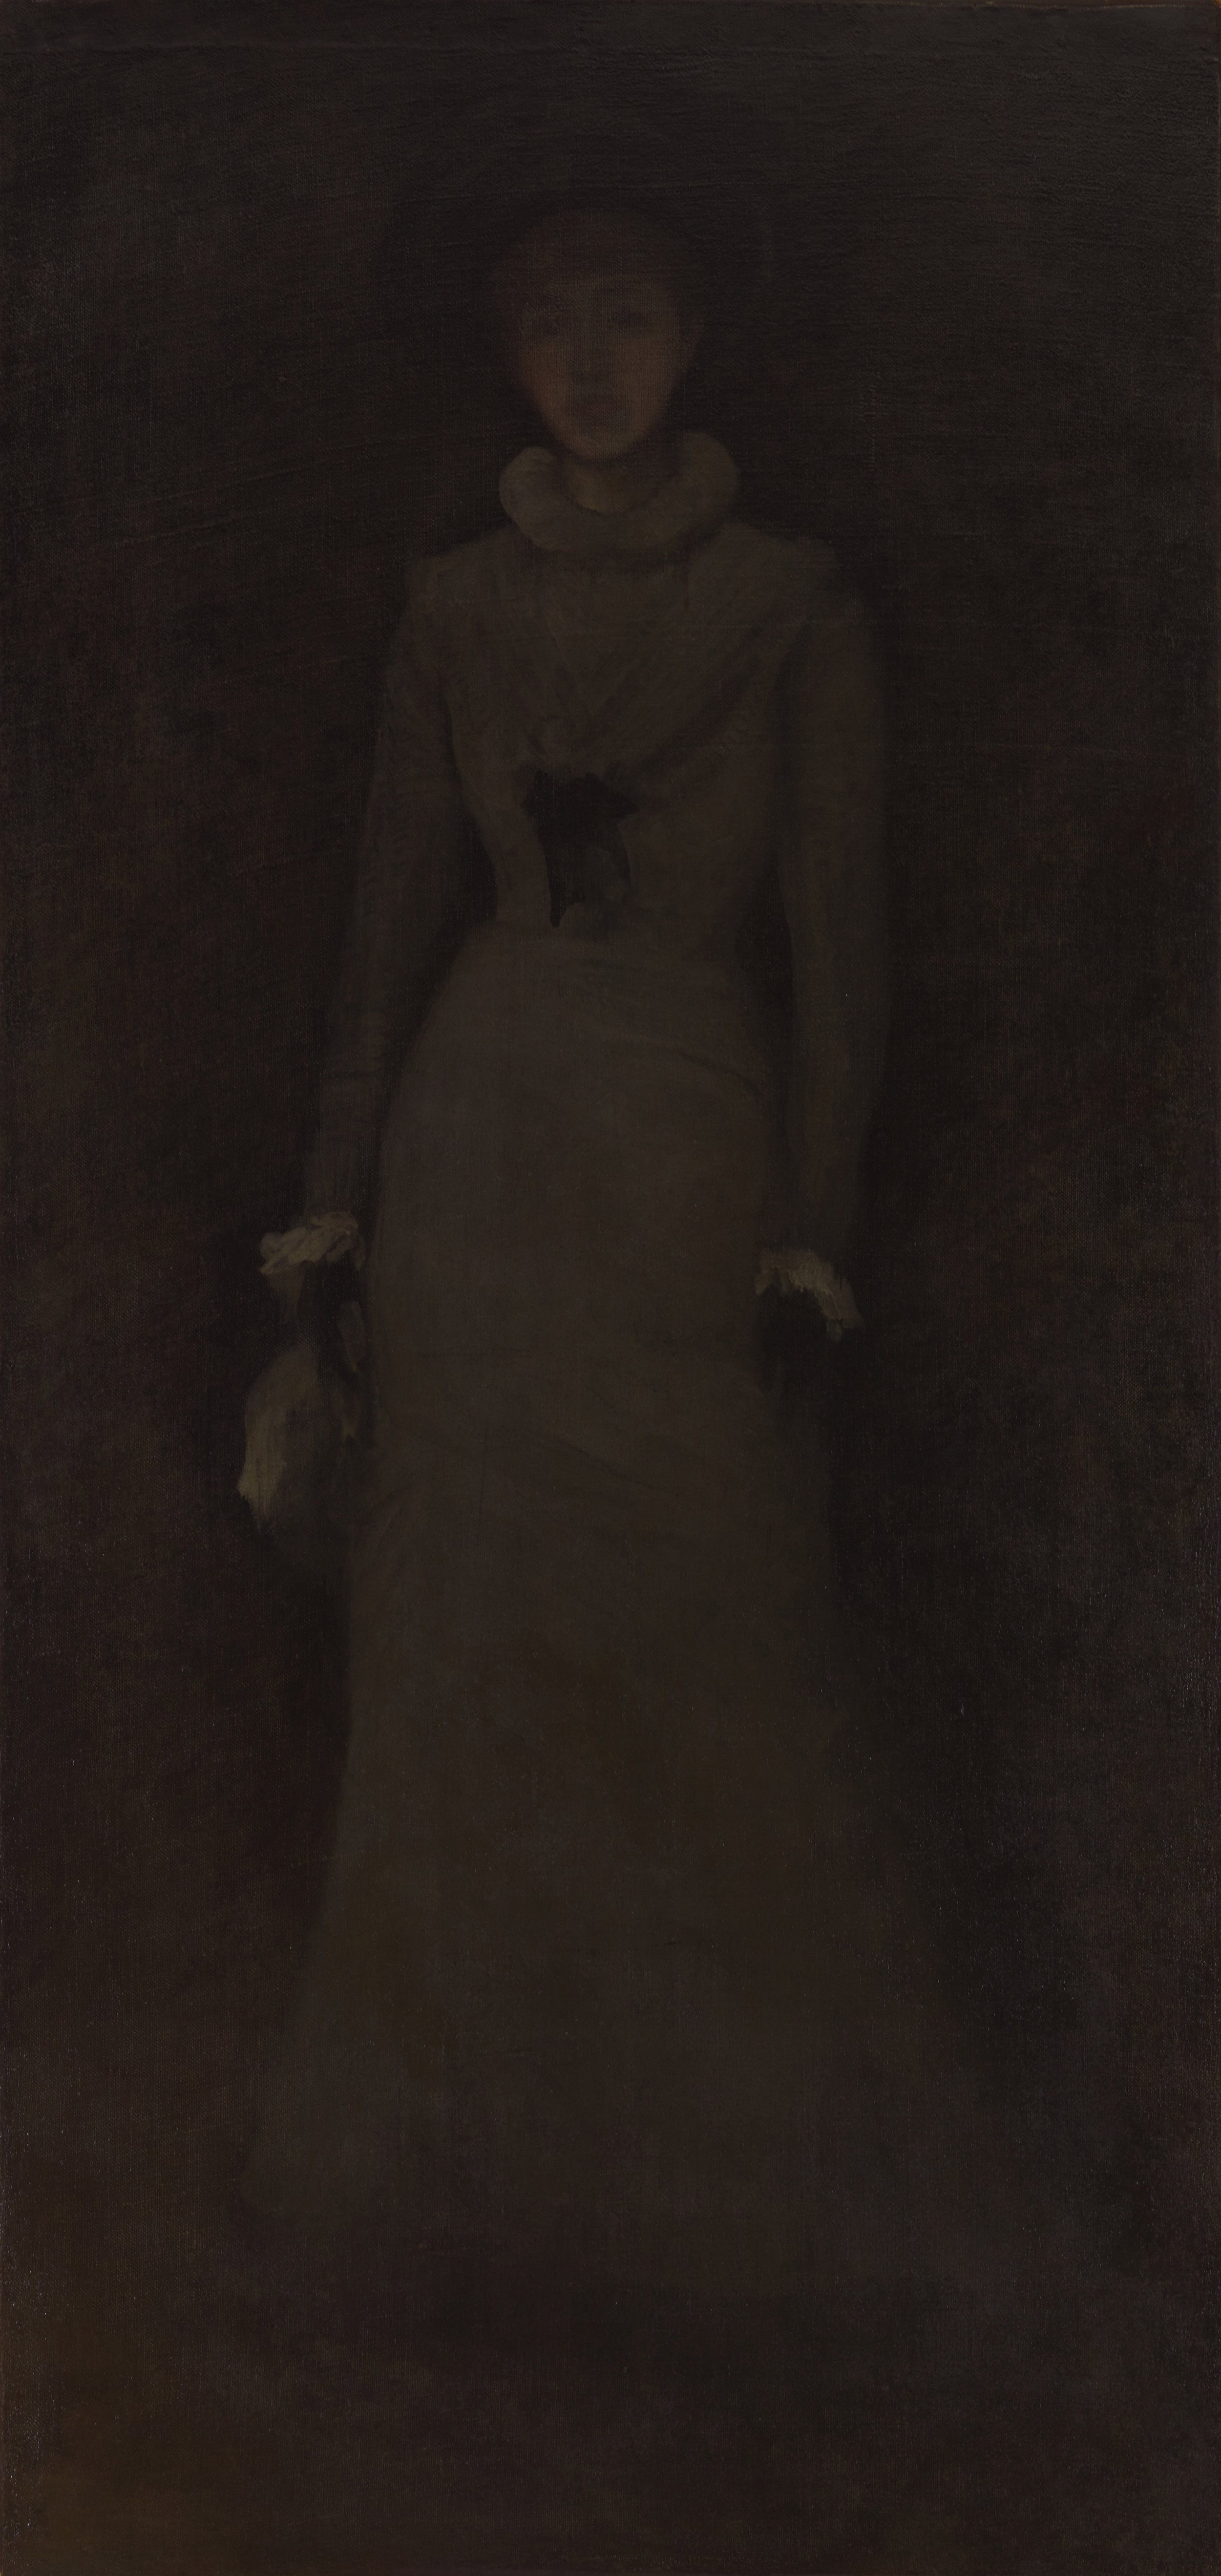   James Abbott McNeill Whistler  United States, 1834–1903  Miss Florence Leyland , circa 1873  oil on canvas, 75 1/2 x 36 1/8 inches Gift of Mr. and Mrs. Benjamin Strouse, 1968.1 